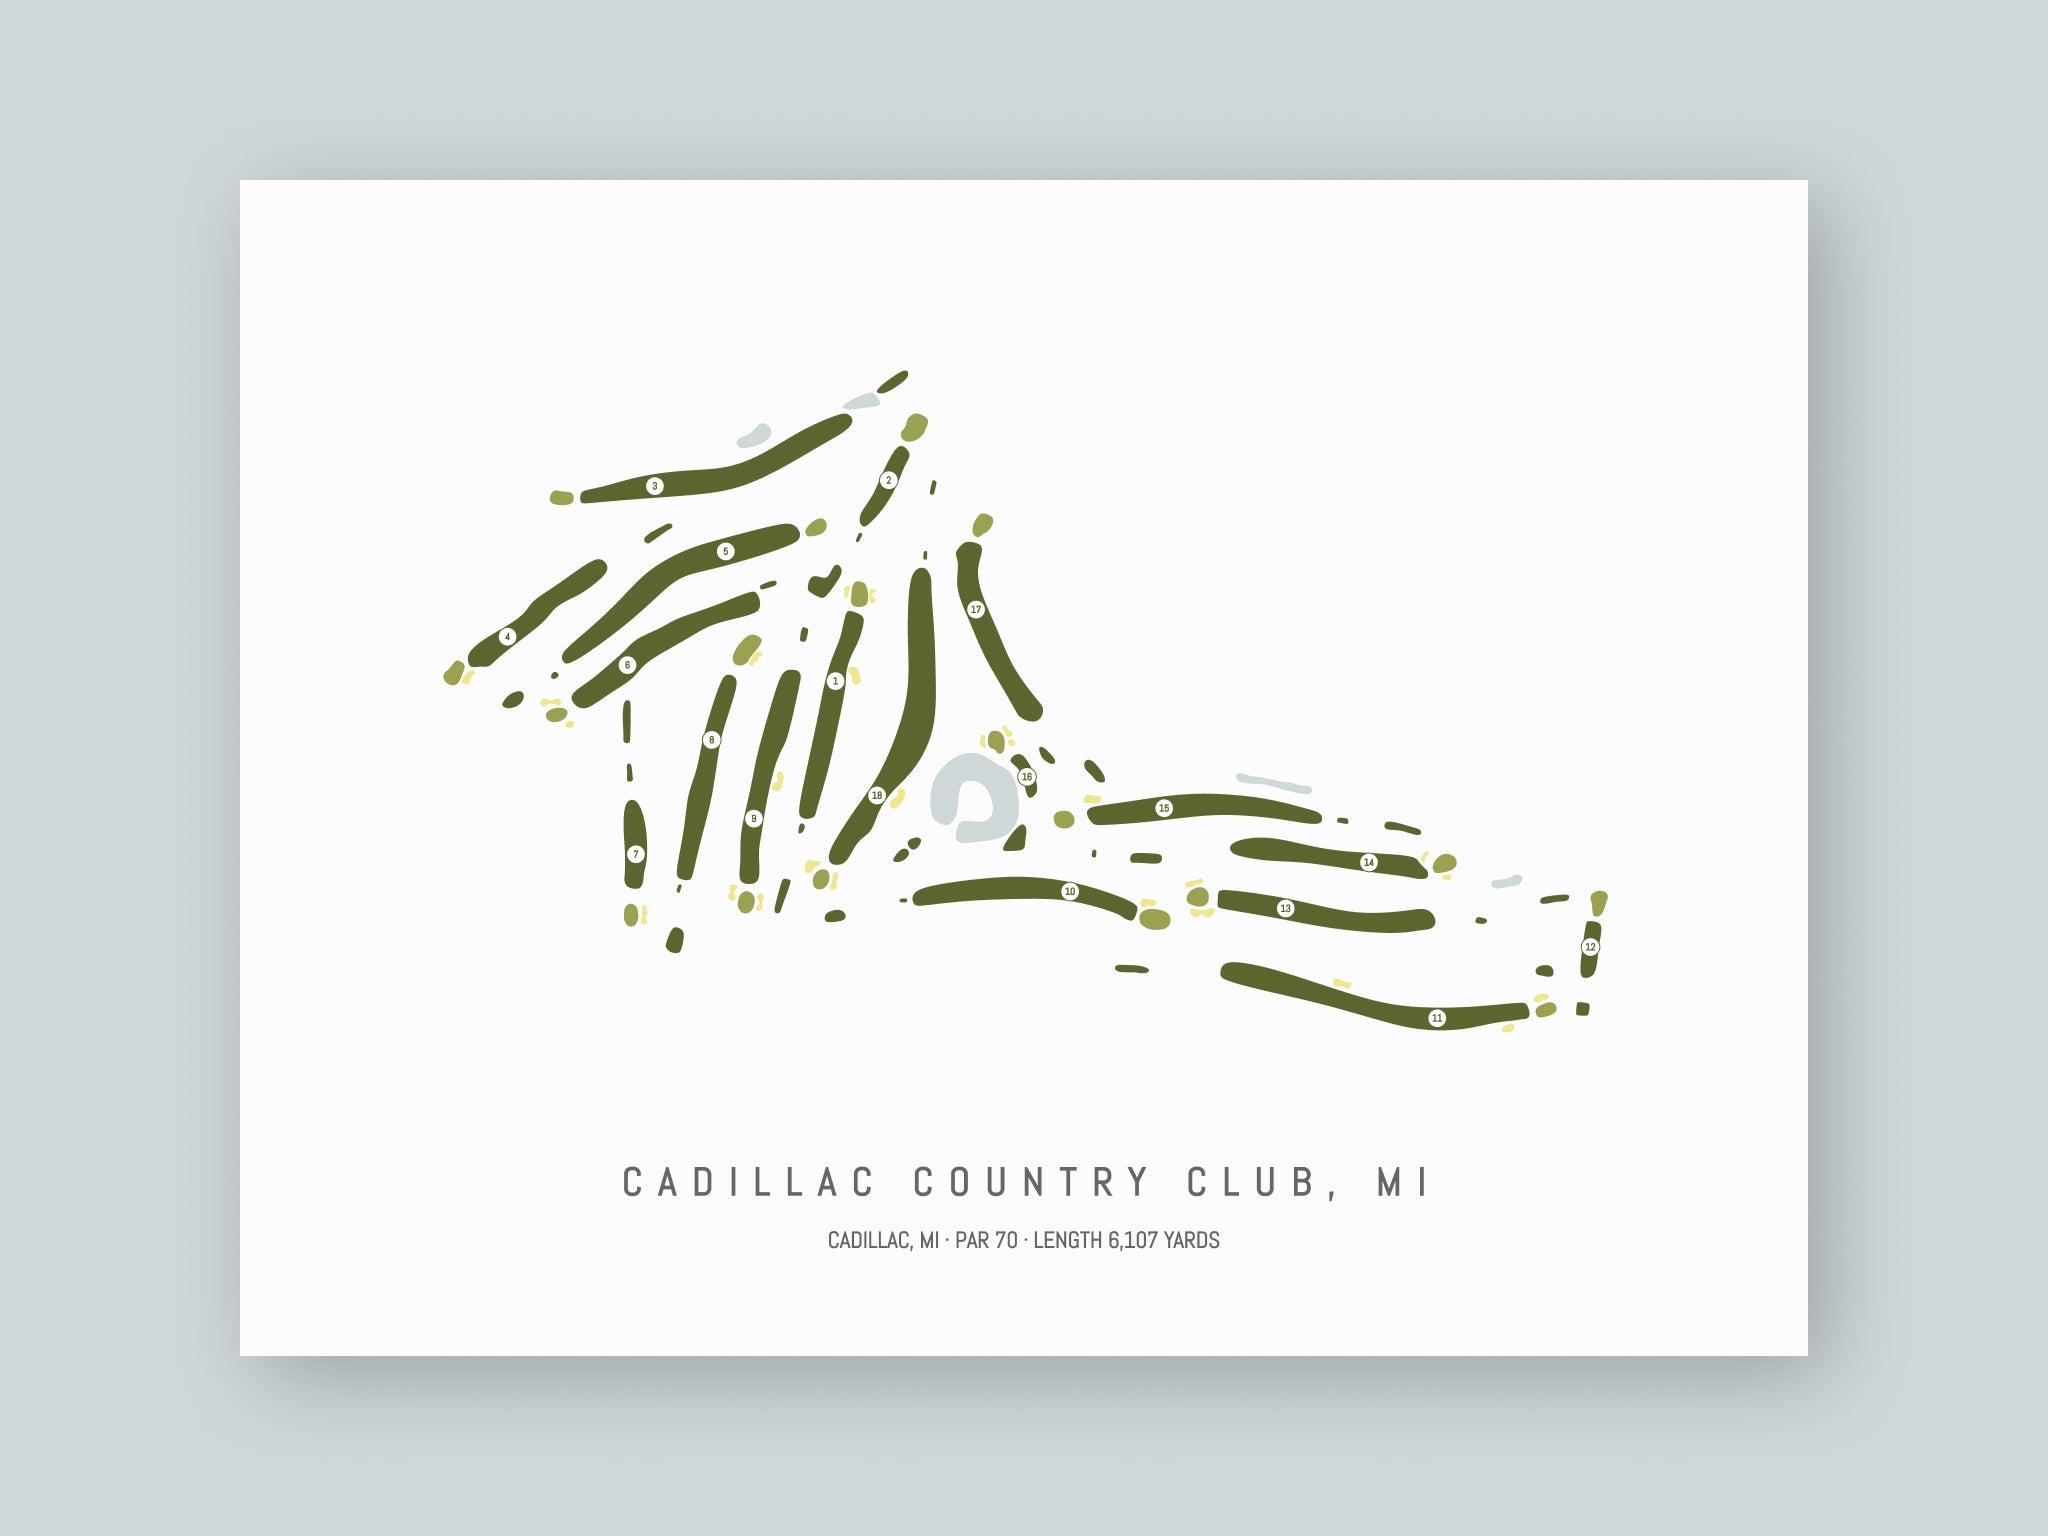 Cadillac-Country-Club-MI--Unframed-24x18-With-Hole-Numbers